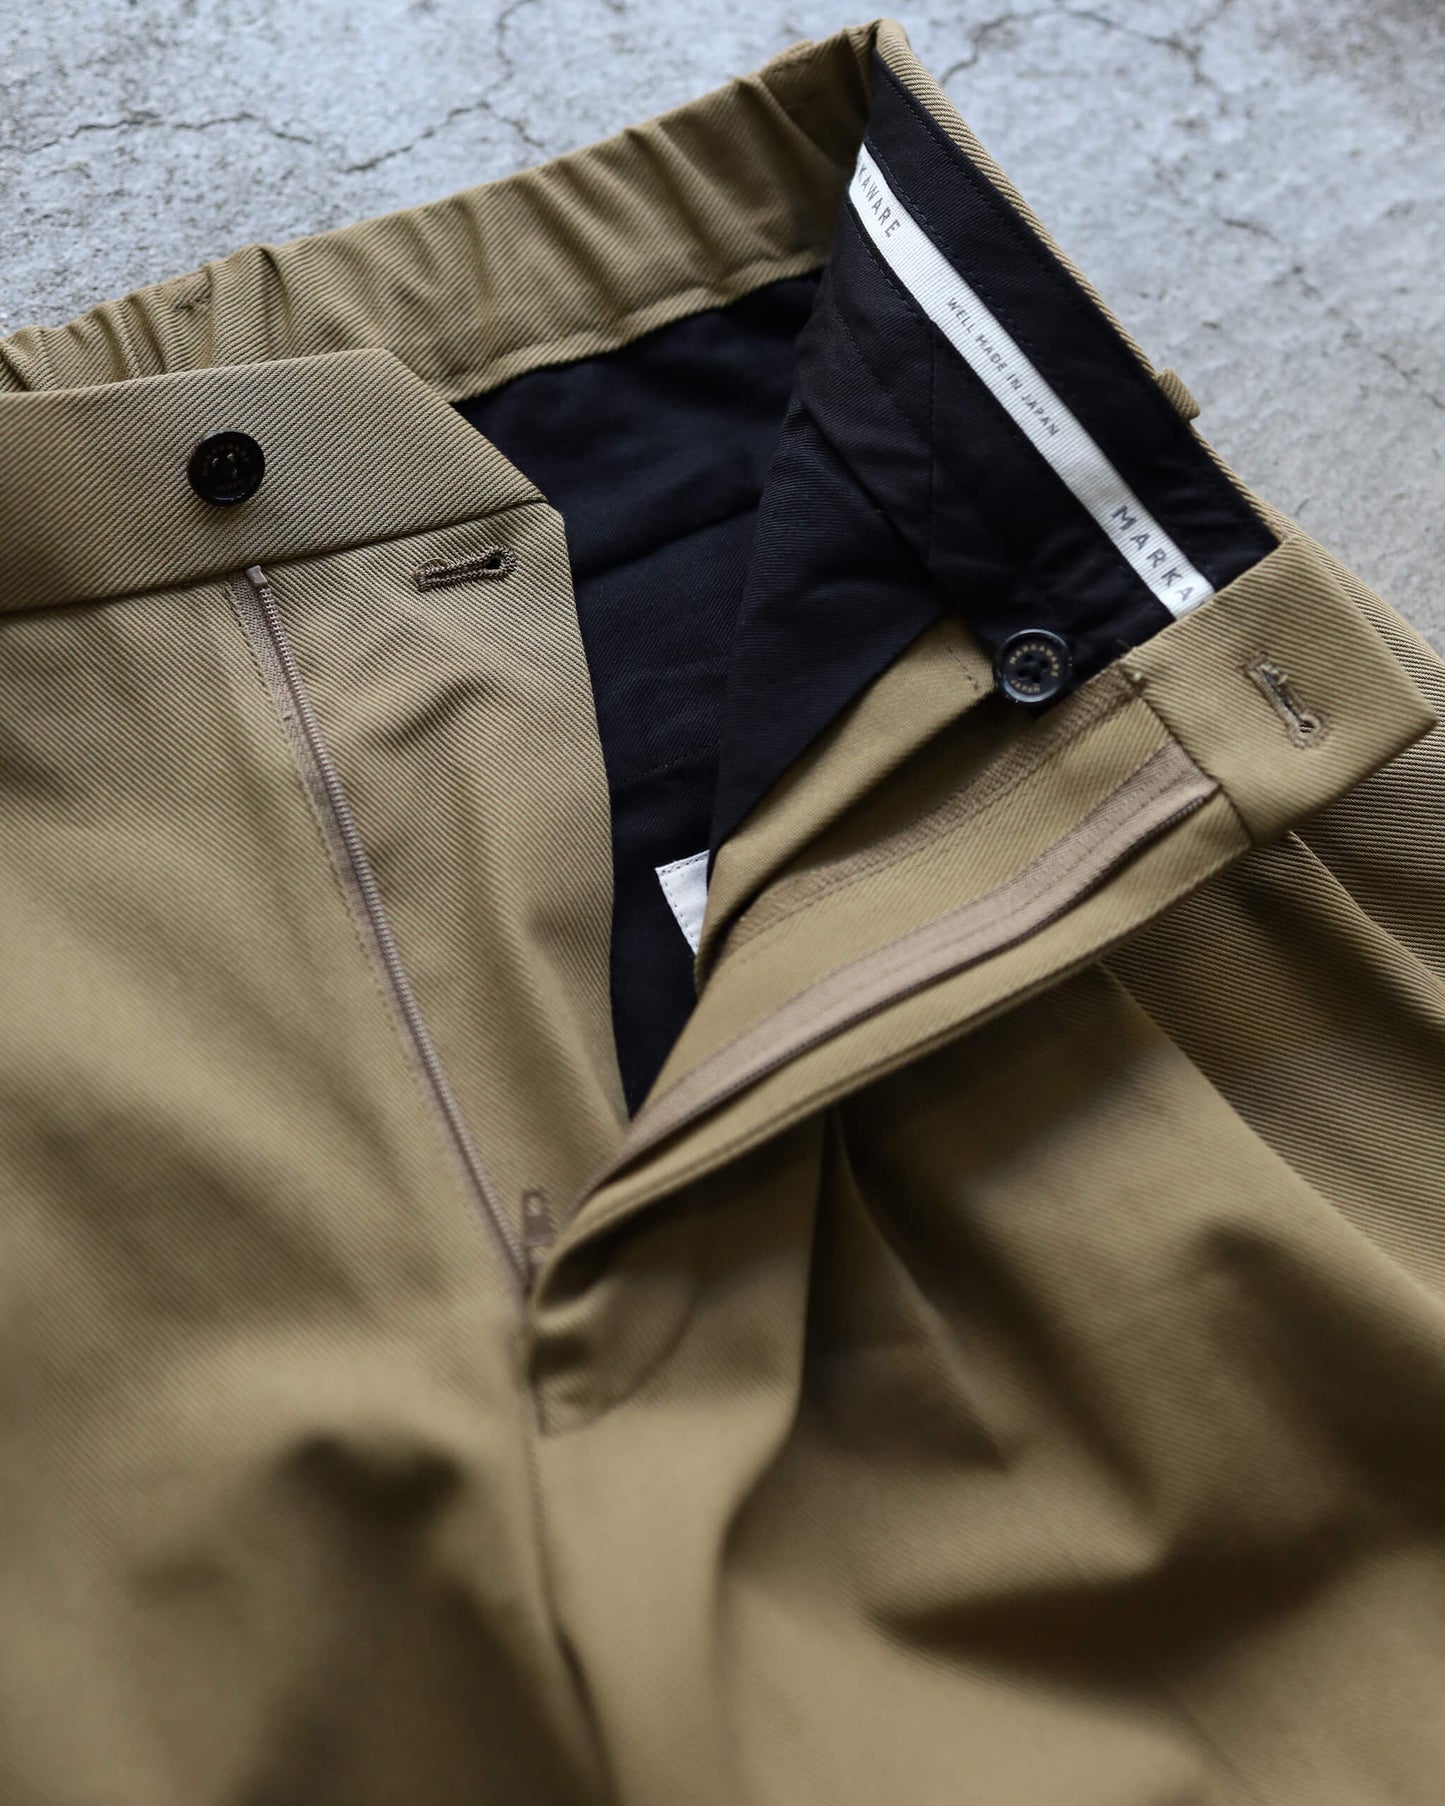 TRIPLE PLEATED WIDE TROUSERS ORGANIC COTTON SURVIVAL CLOTH "BEIGE"